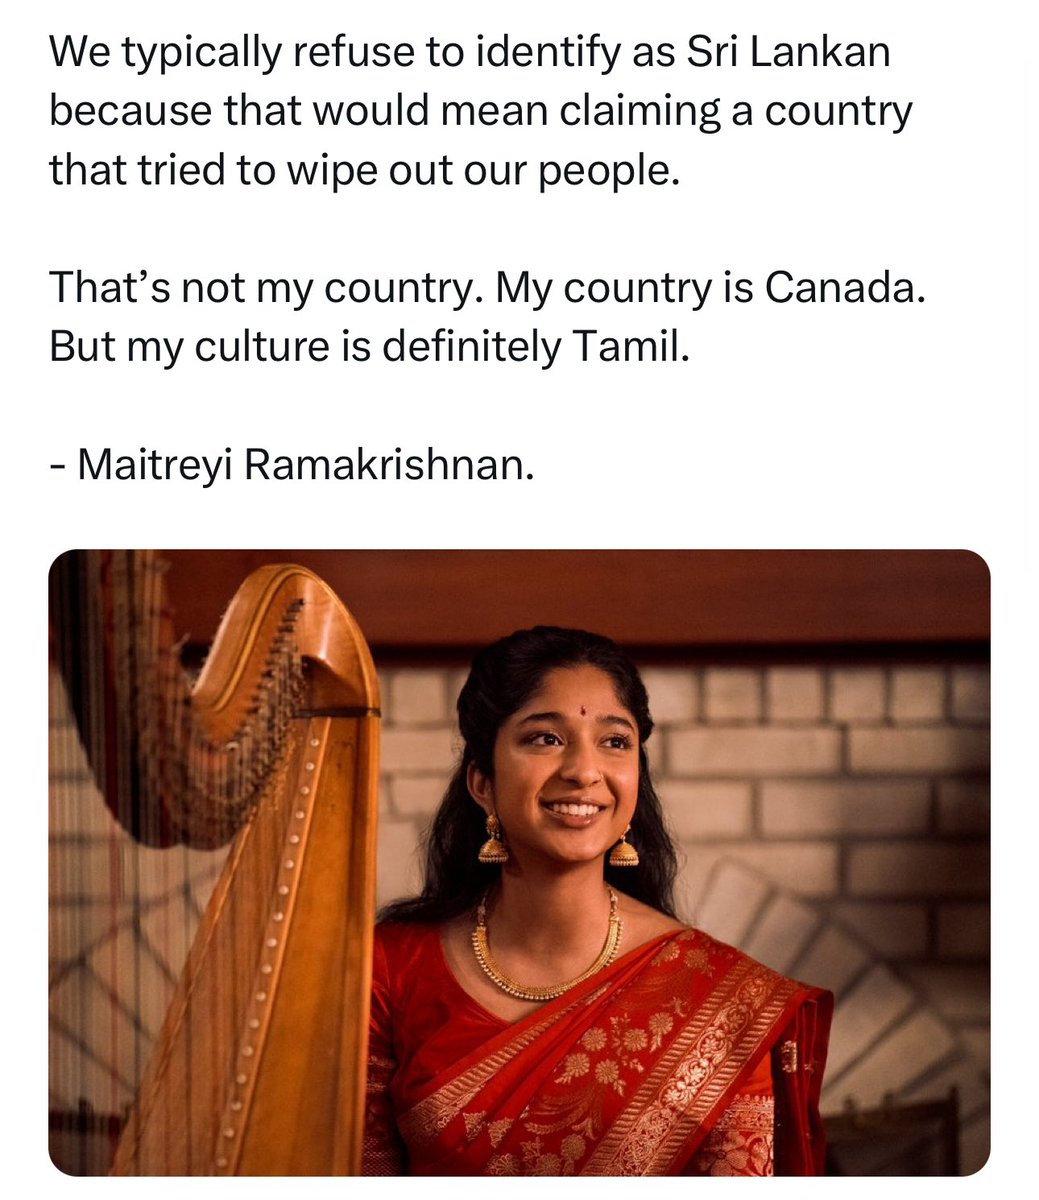 While Hindu Gen Z in the US call Palestinian jihadists as “our people” in a desperate attempt to fit it, non resident Sri Lankan or Sikh kids don’t suffer from this malady See how clear Maitreyi Ramakrishnan’s mind is about Sri Lankan Tamil genocide despite being born and raised…